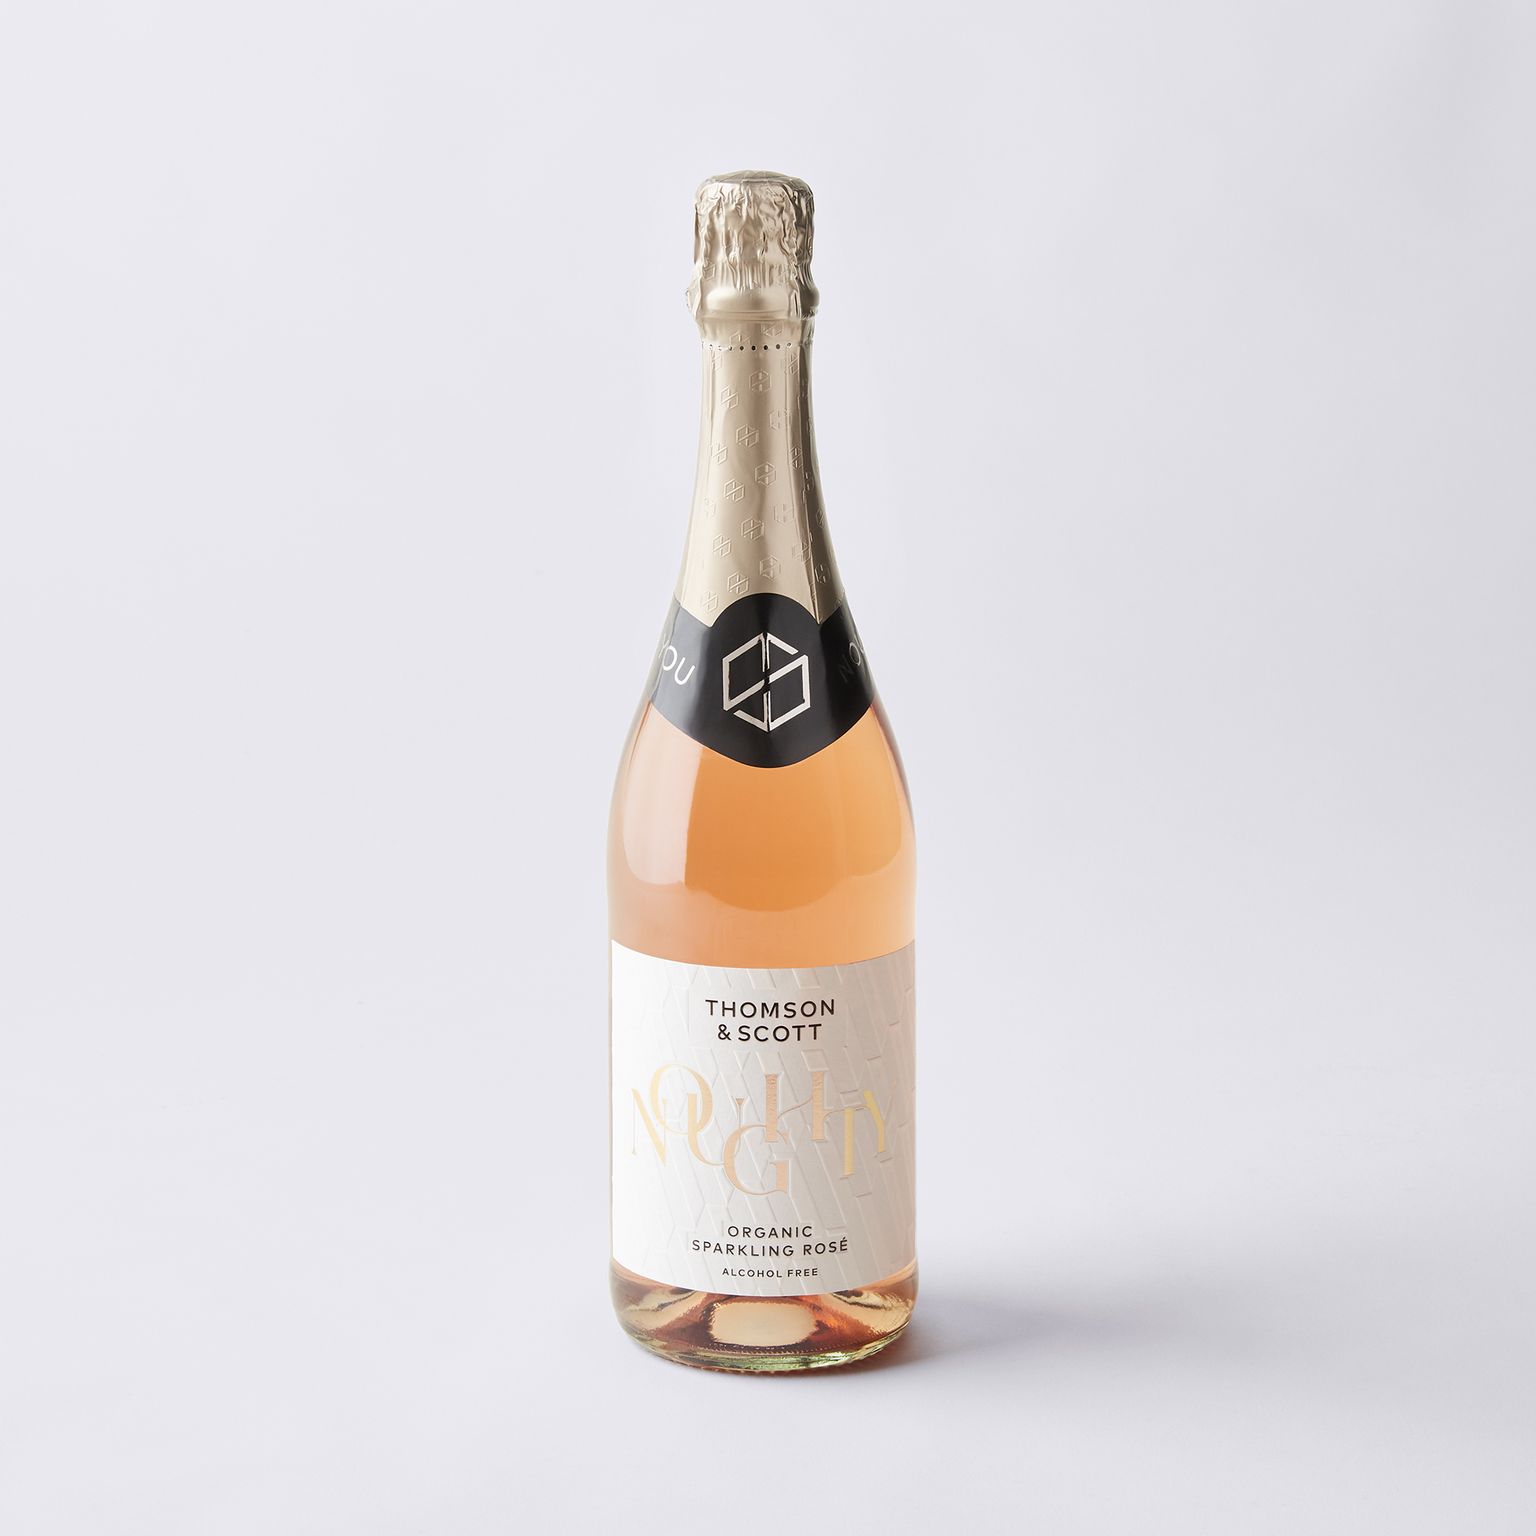 Noughty Nonalcoholic Sparkling Rose image